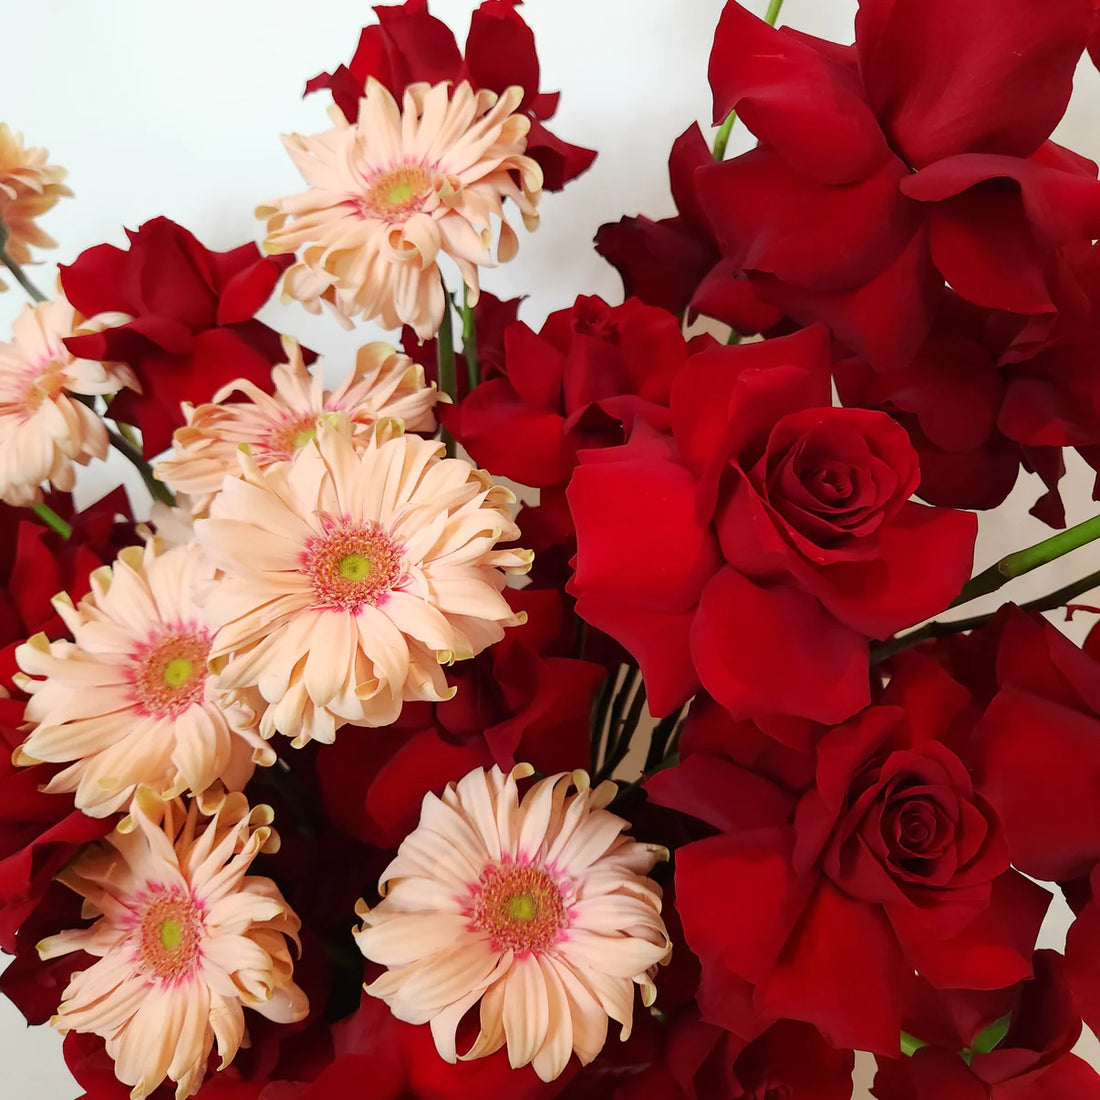 Where Can I Find Valentine's Day Flower Delivery in Dubai?